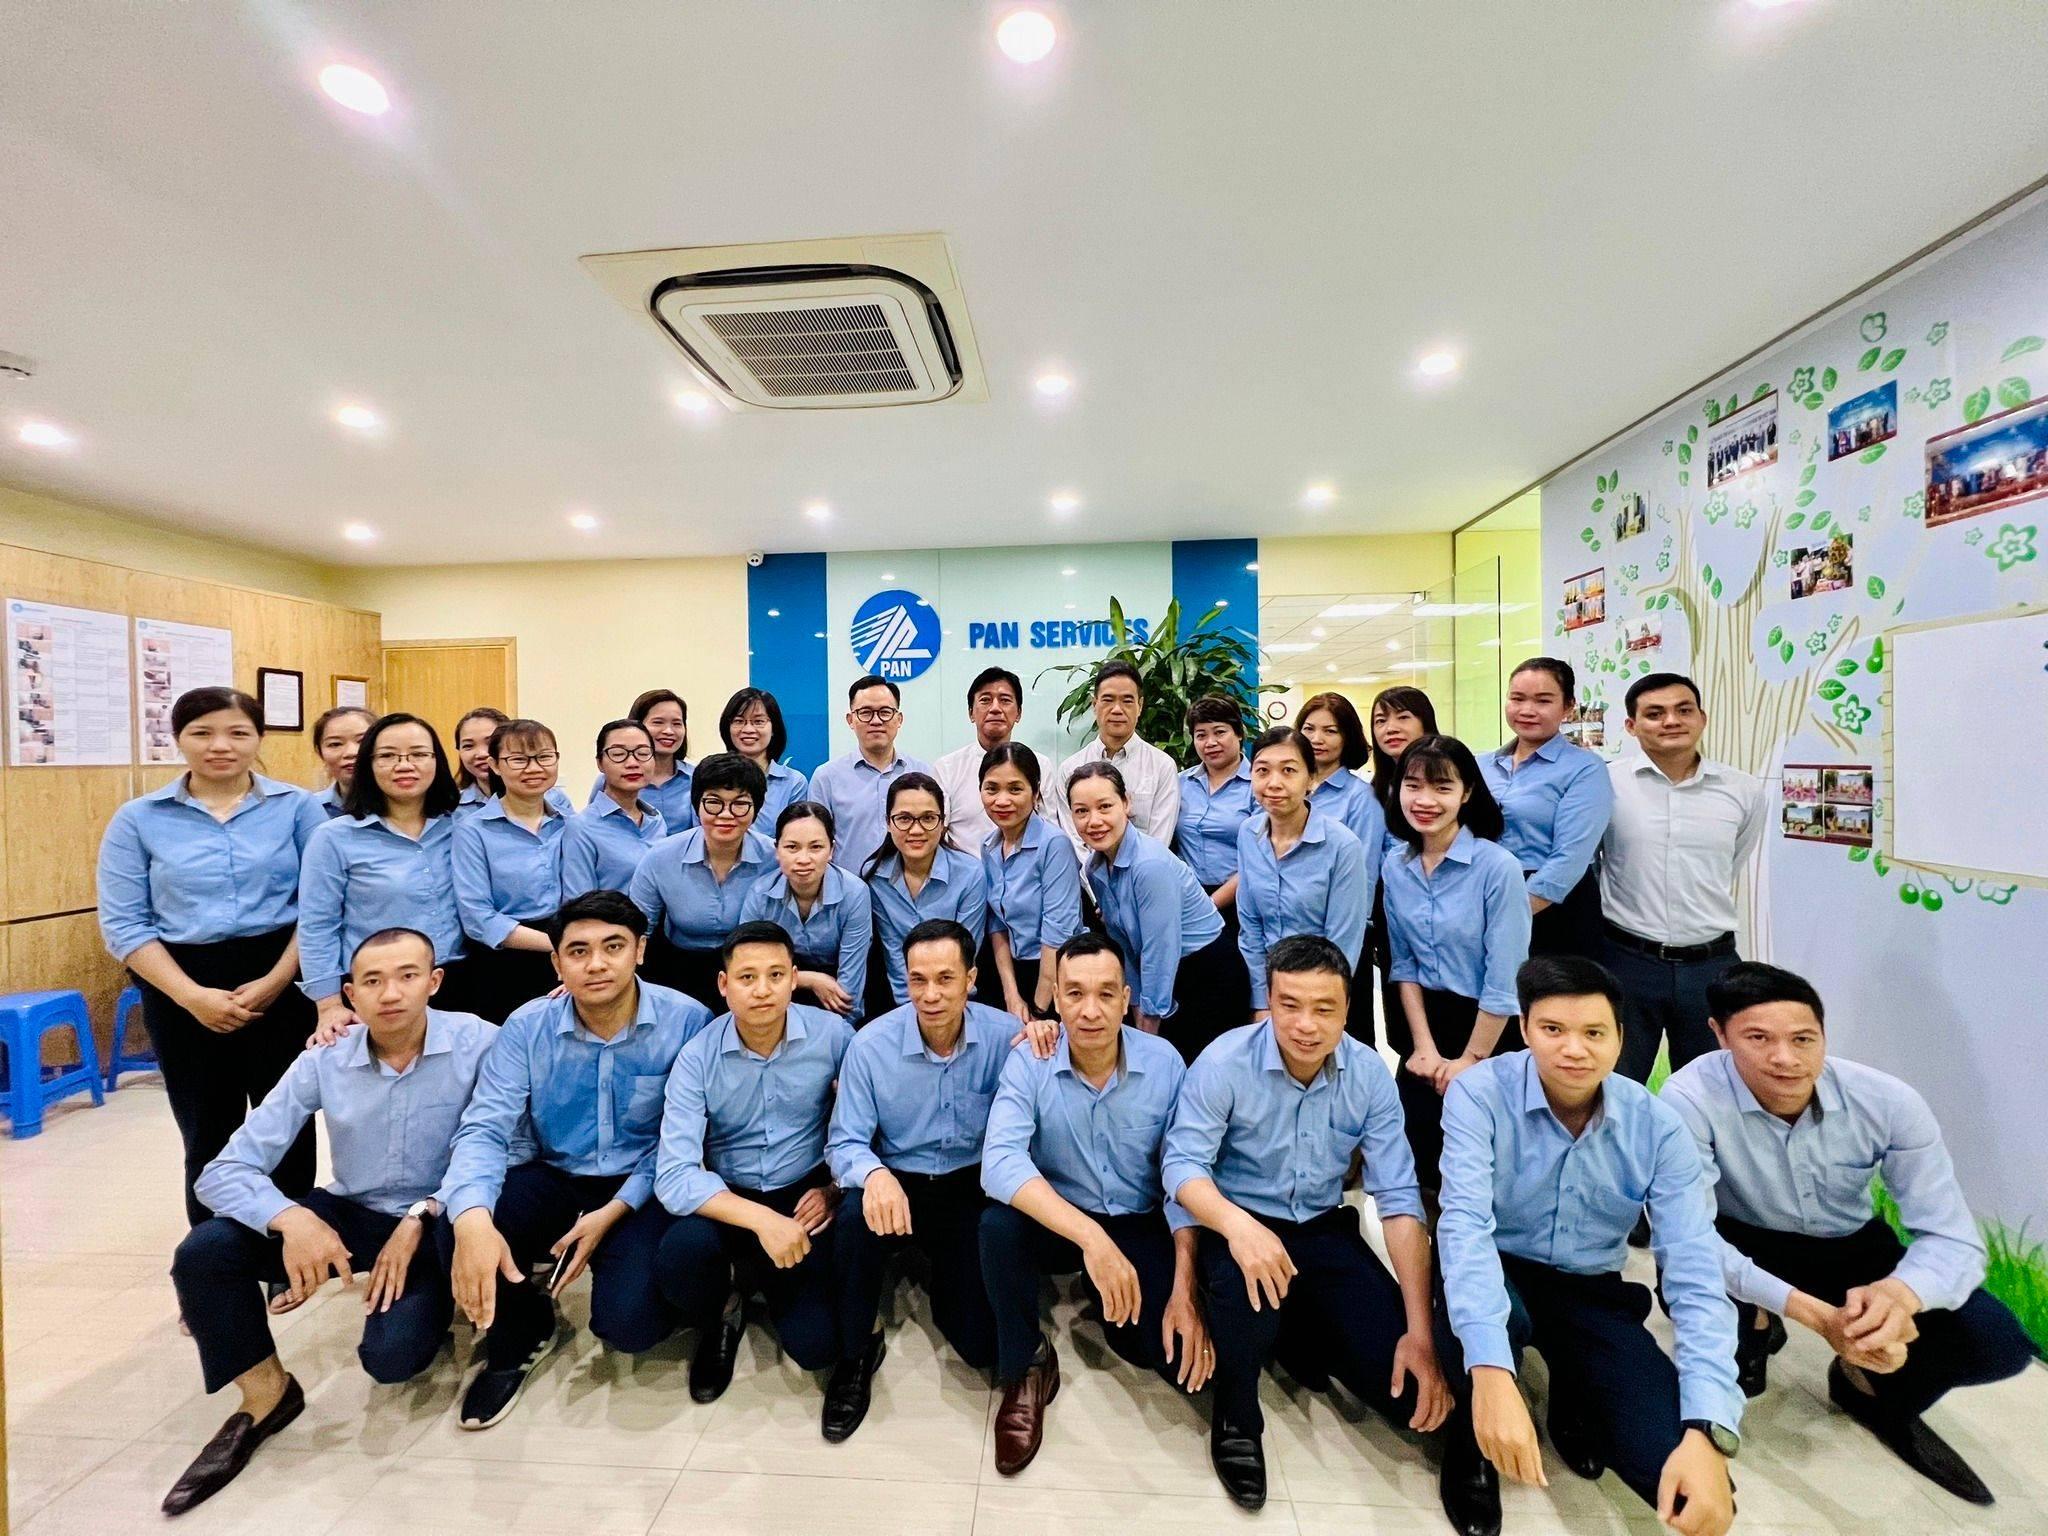 Latest Pan Services Hà Nội employment/hiring with high salary & attractive benefits